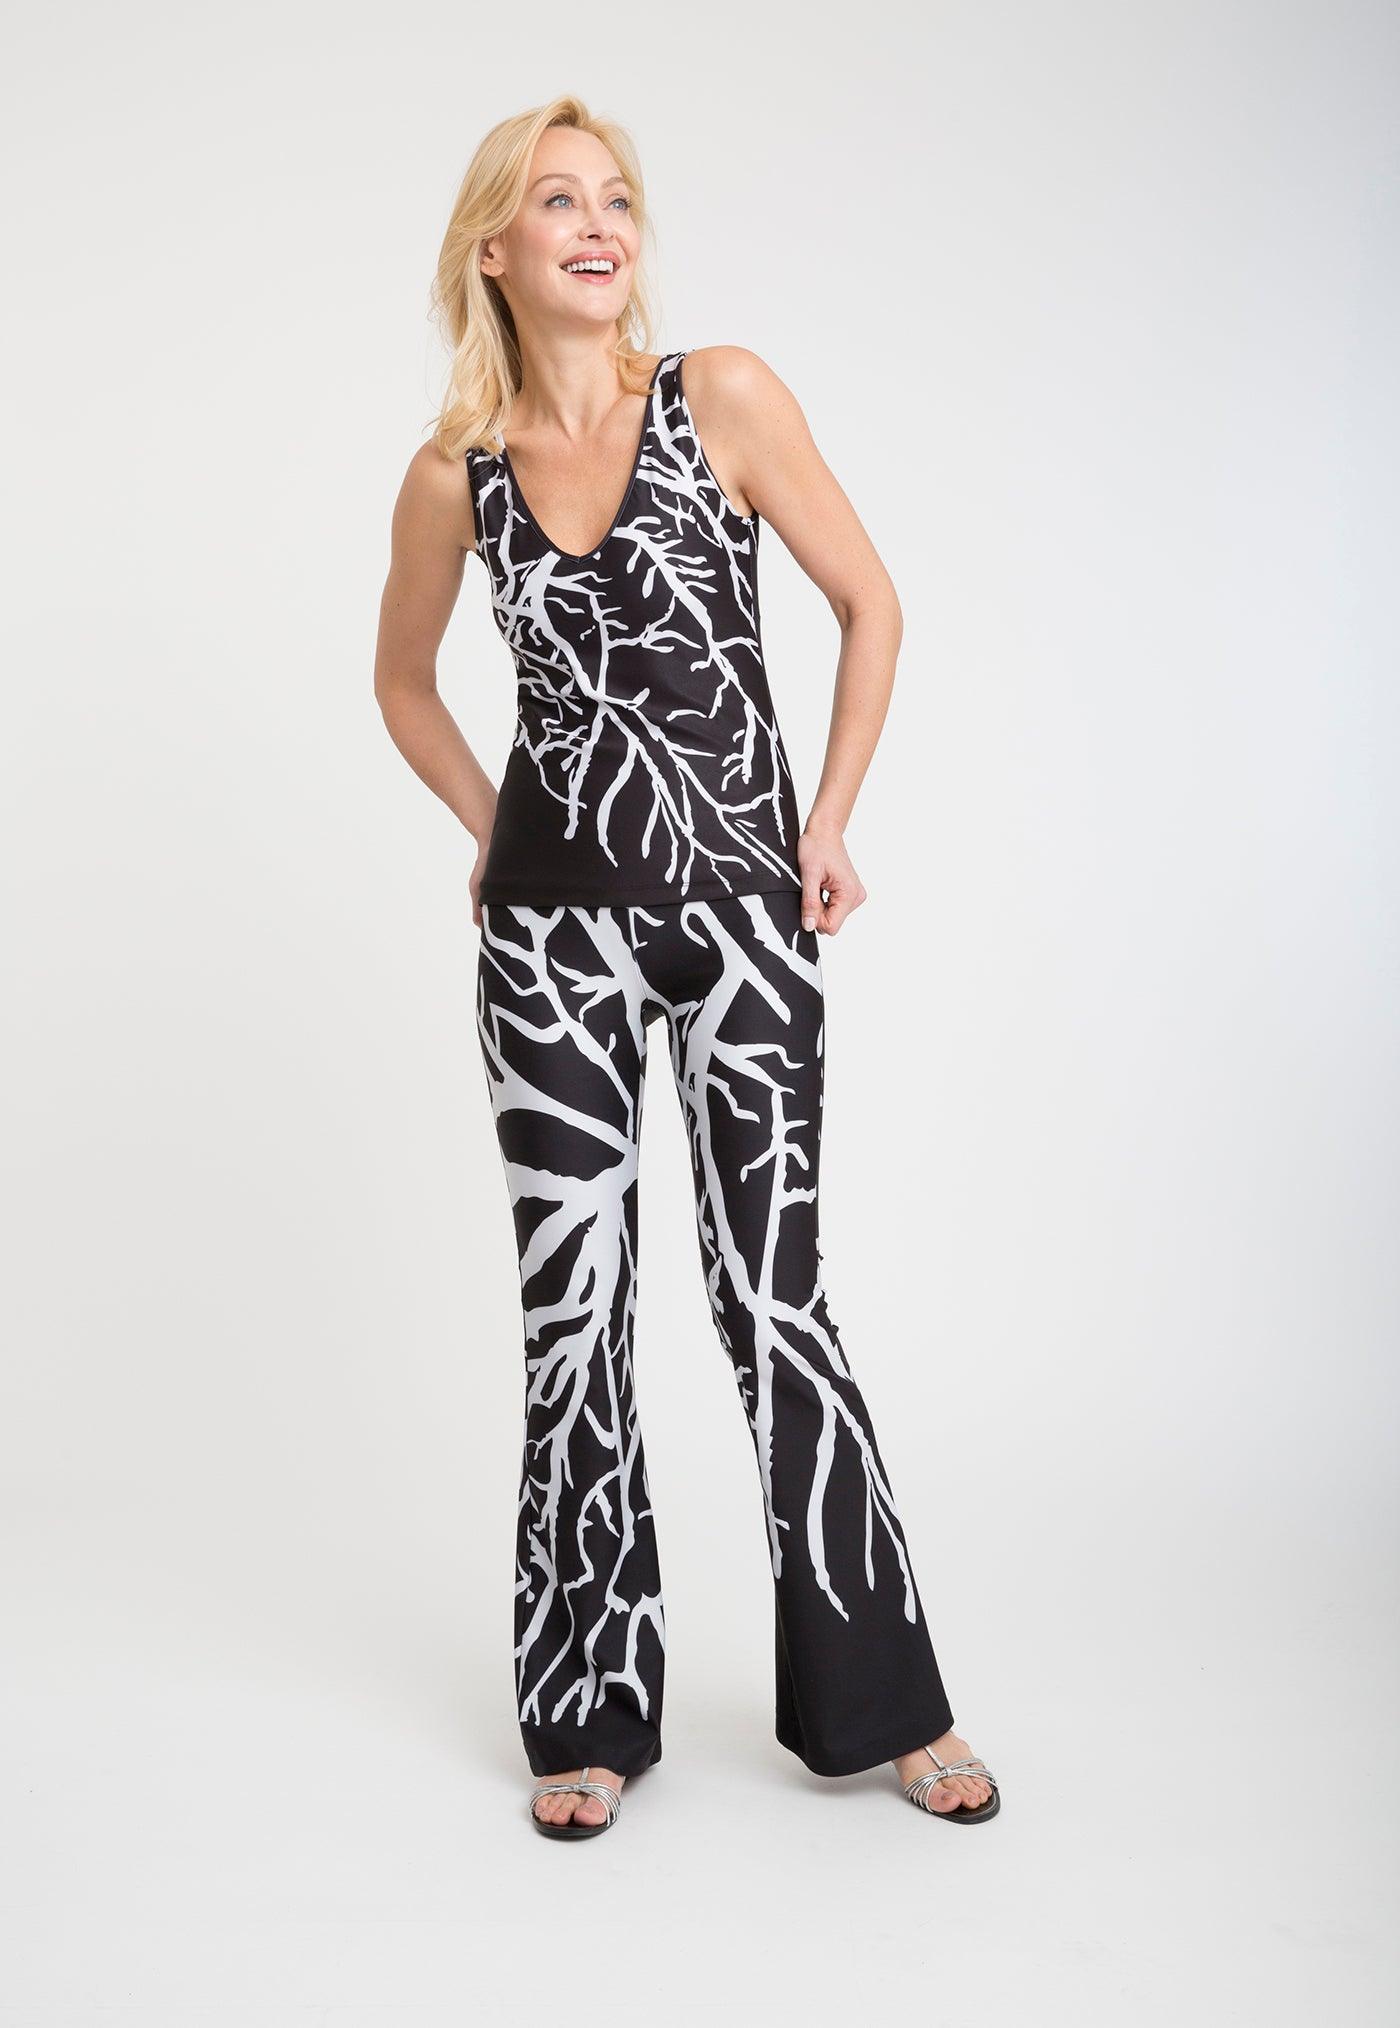 black and white coral printed stretch knit tank top with black and white coral printed stretch knit pants